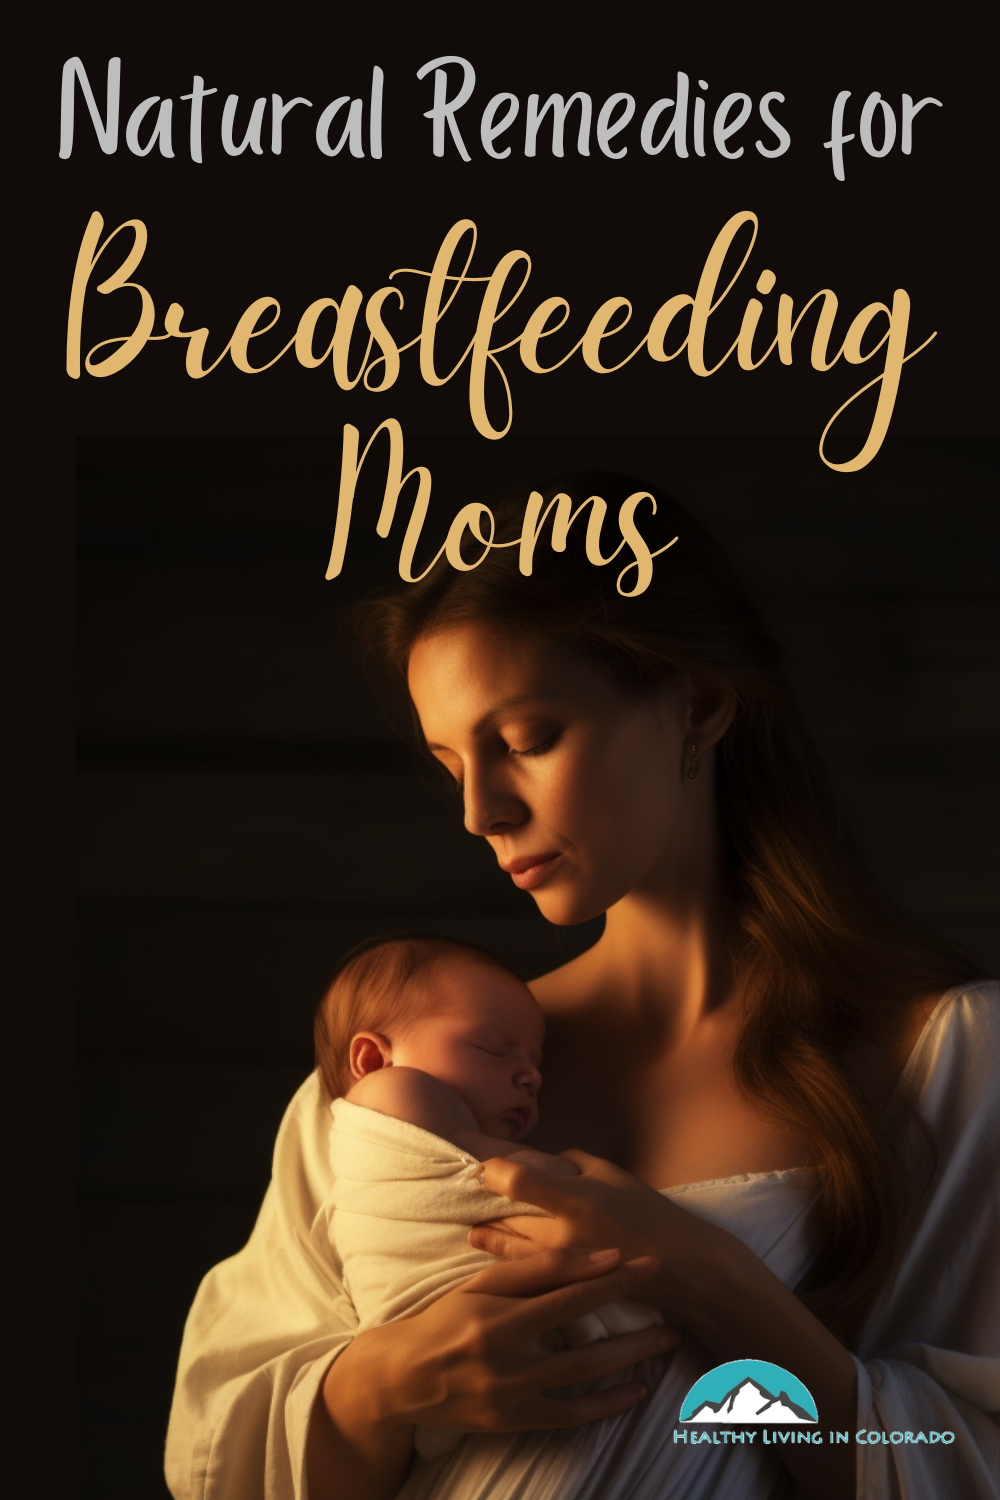 natural remedies for breastfeeding moms